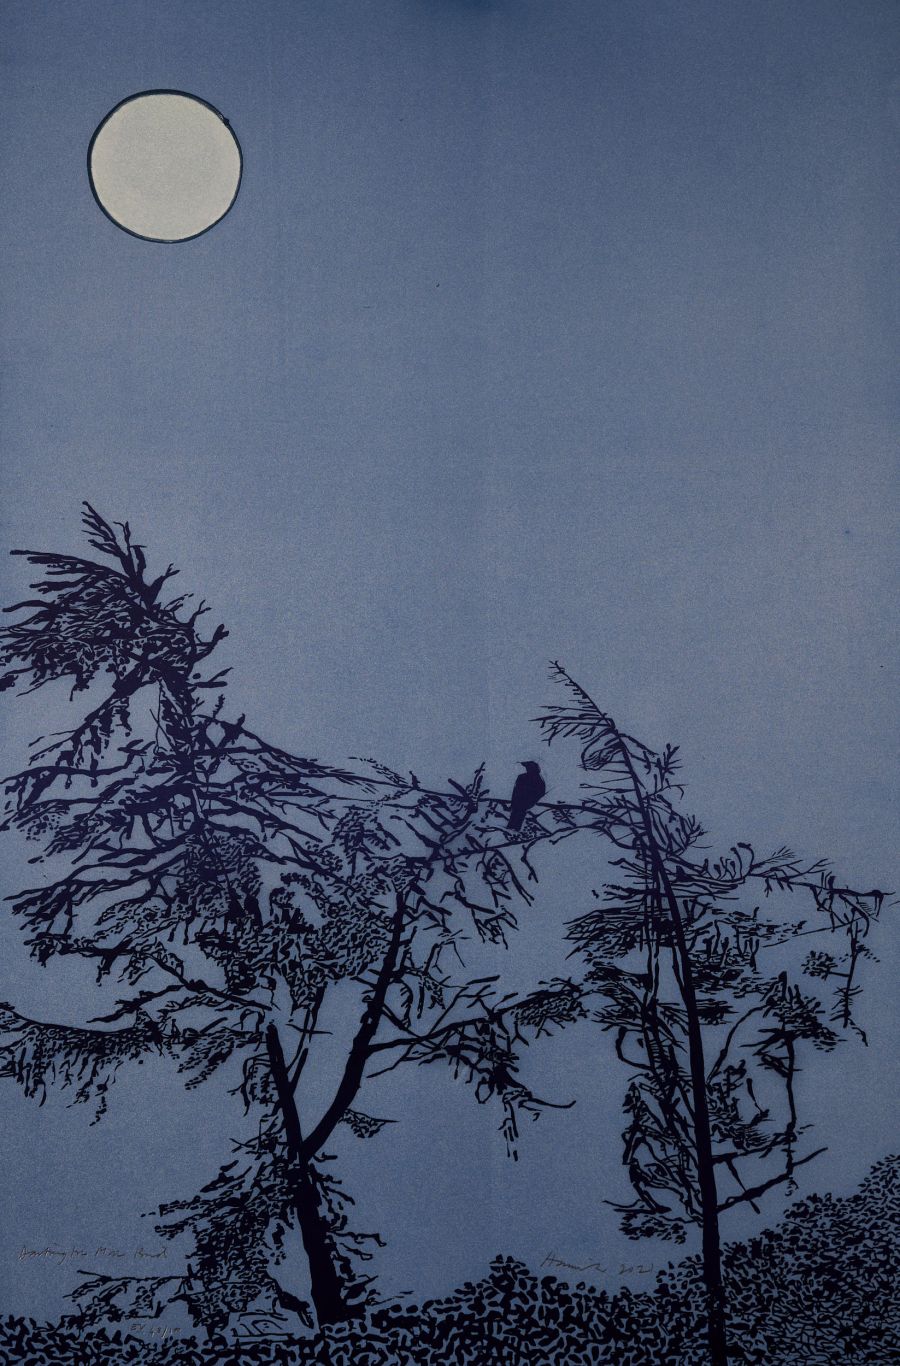 A full moon and blue trees against a dusty sky.